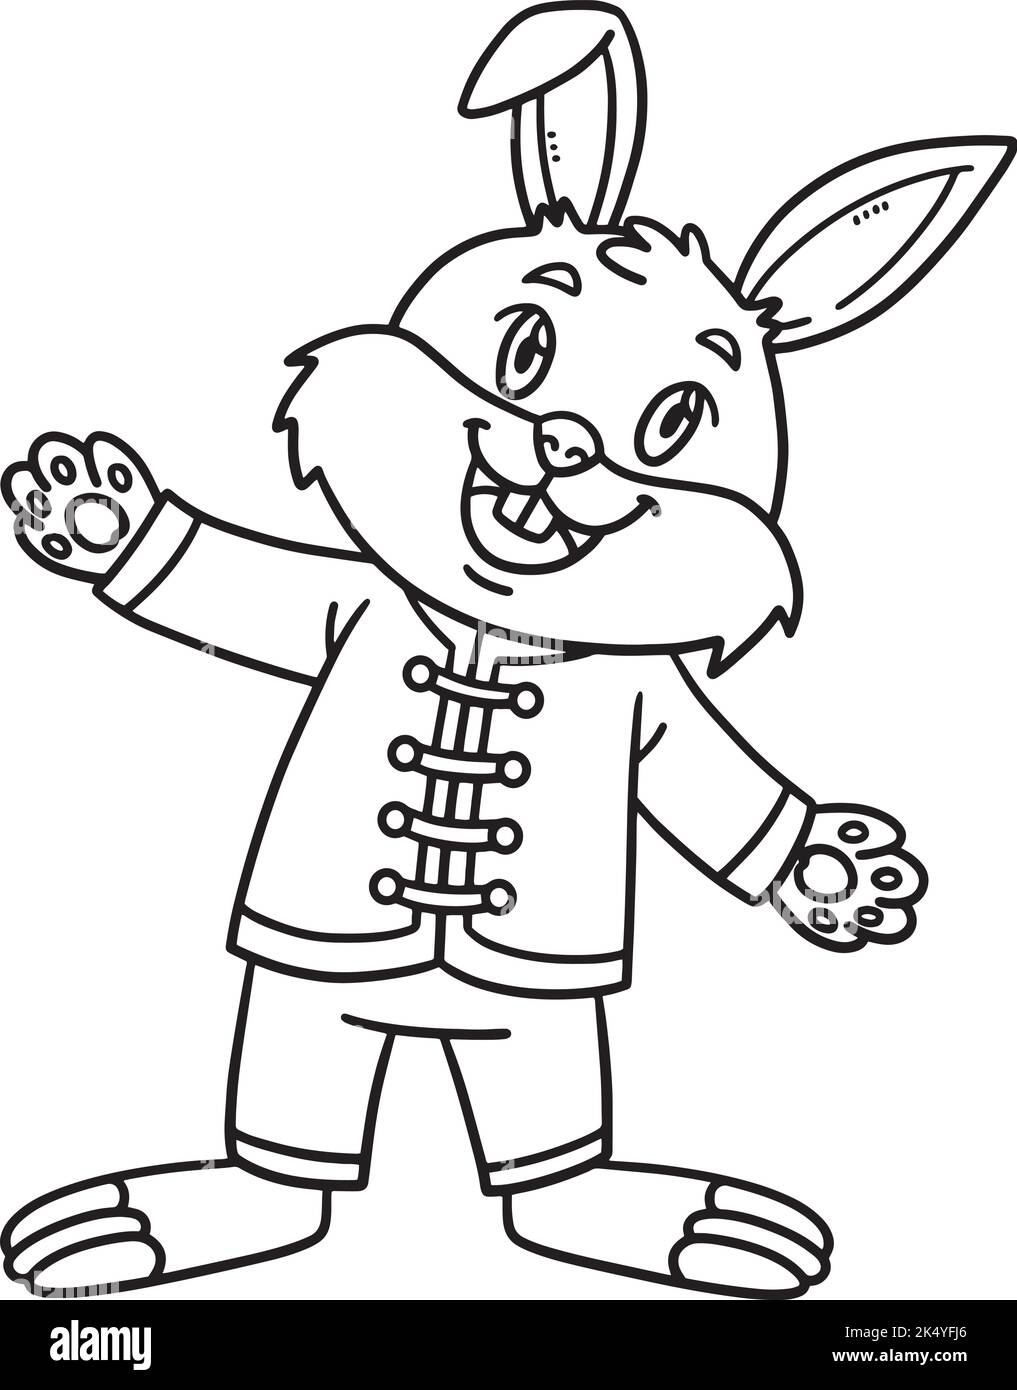 Rabbit Chinese Outfit Isolated Coloring Pages Stock Vector